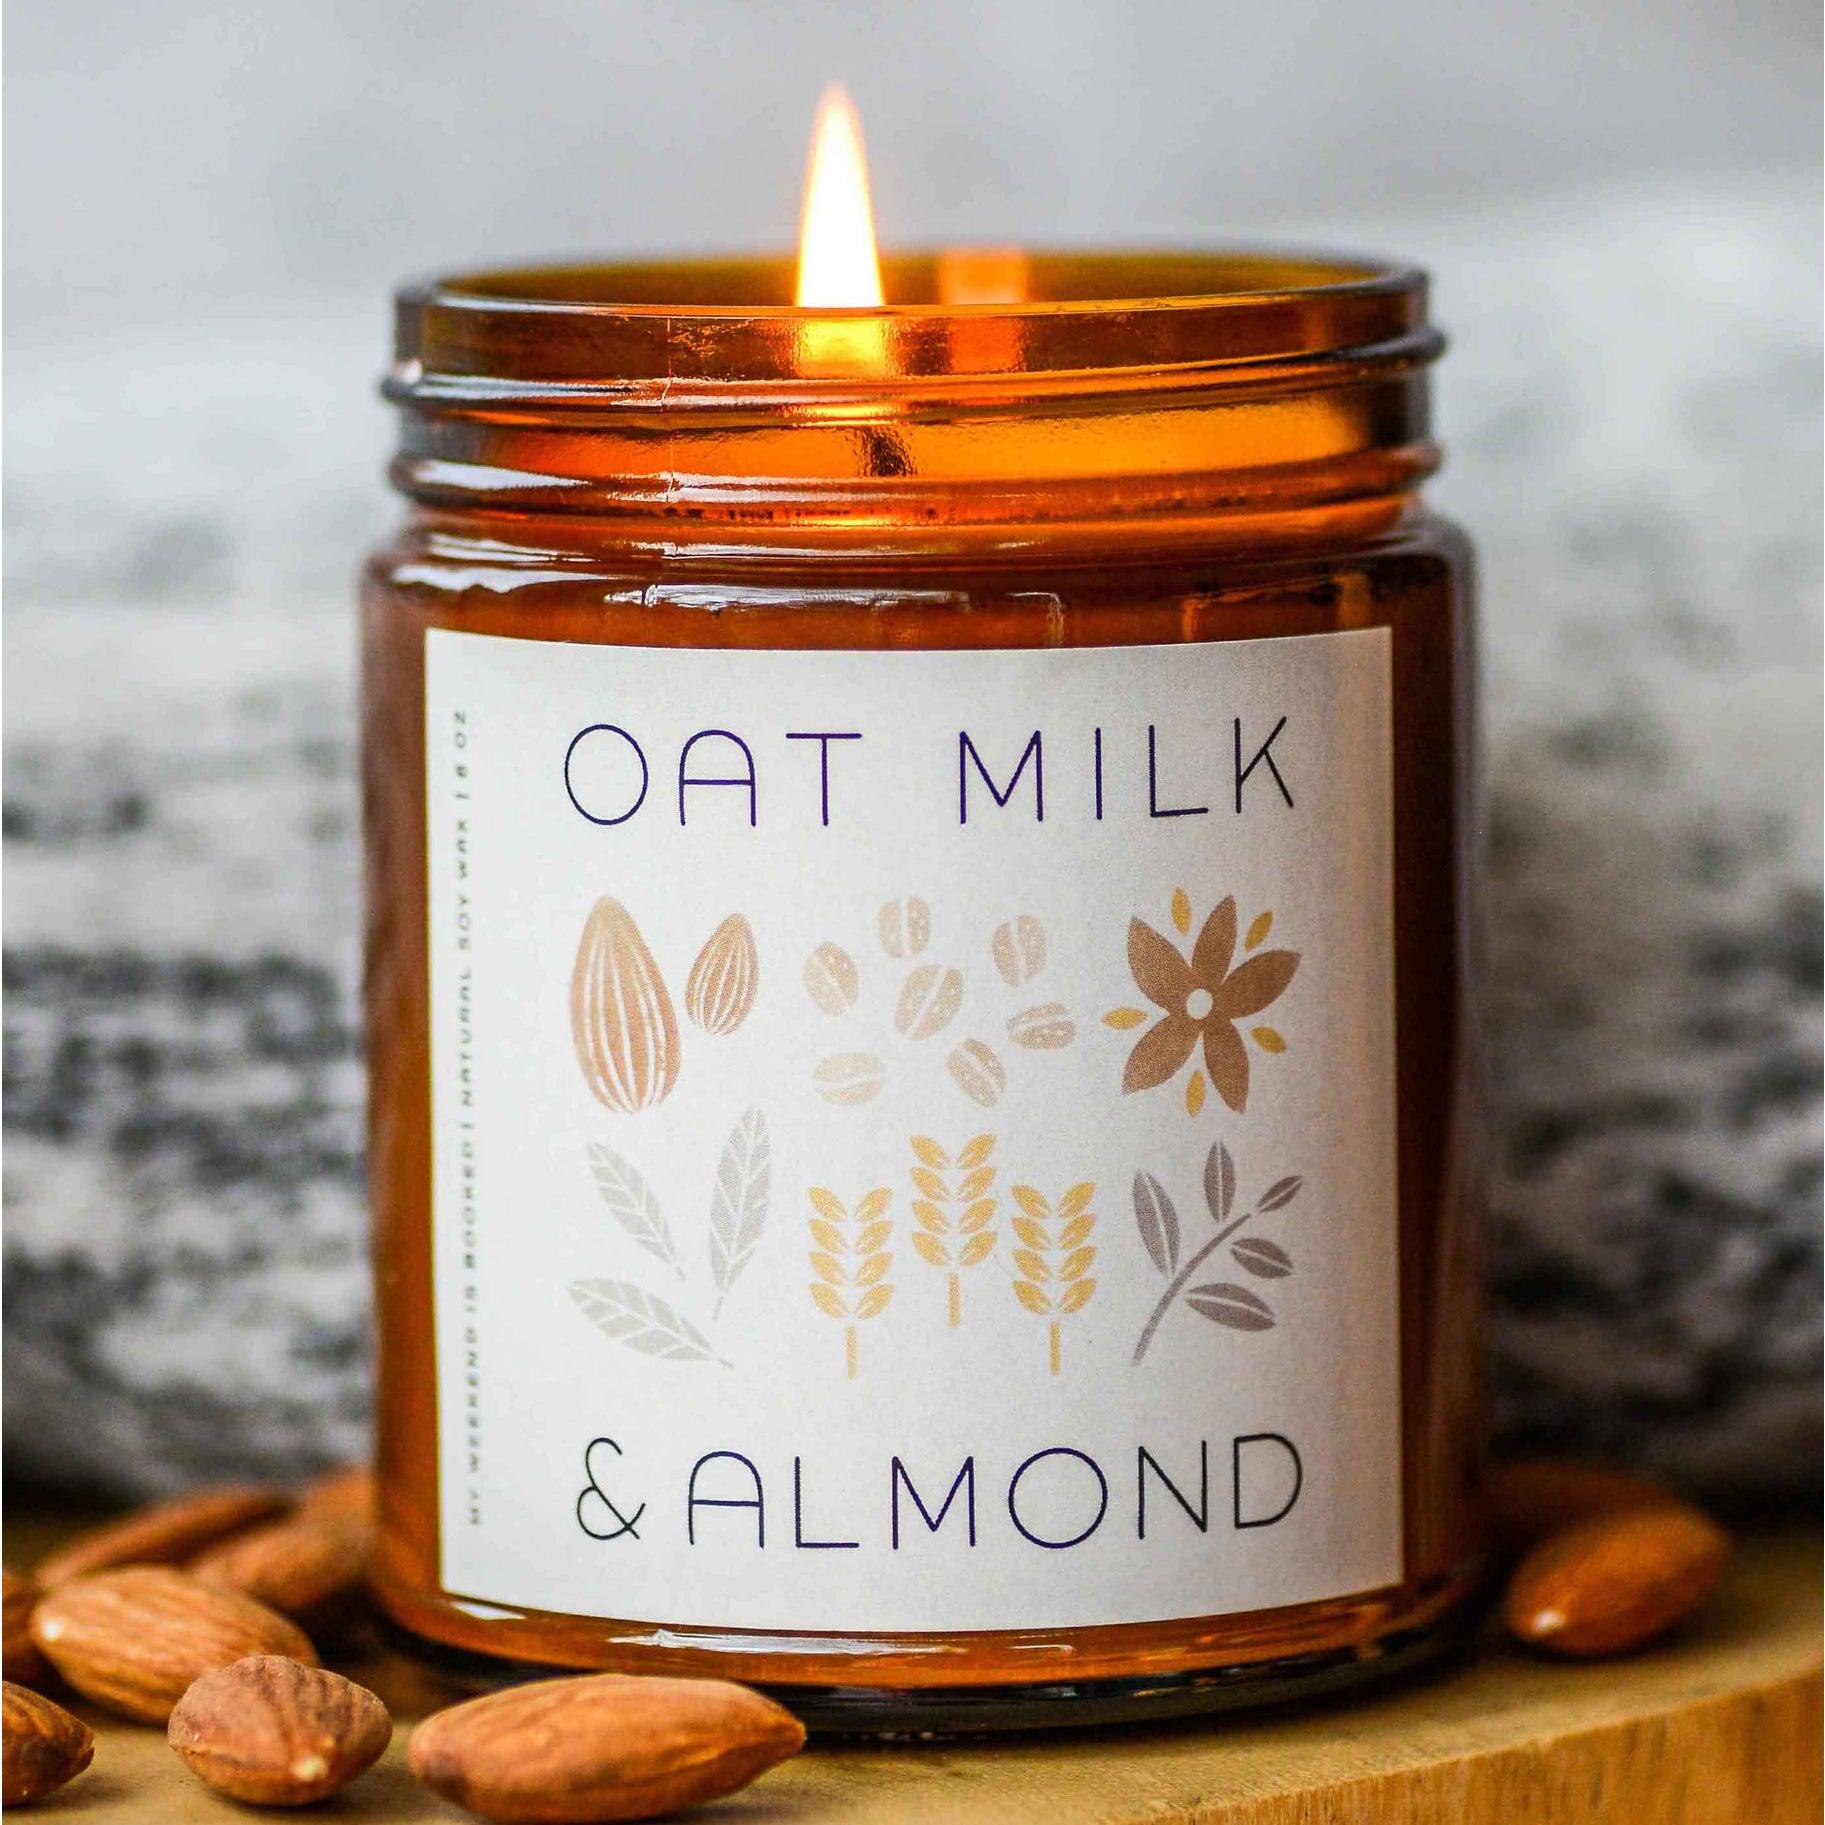 OAT MILK & ALMOND SOY CANDLE-Candle-MY WEEKEND IS BOOKED-Coriander